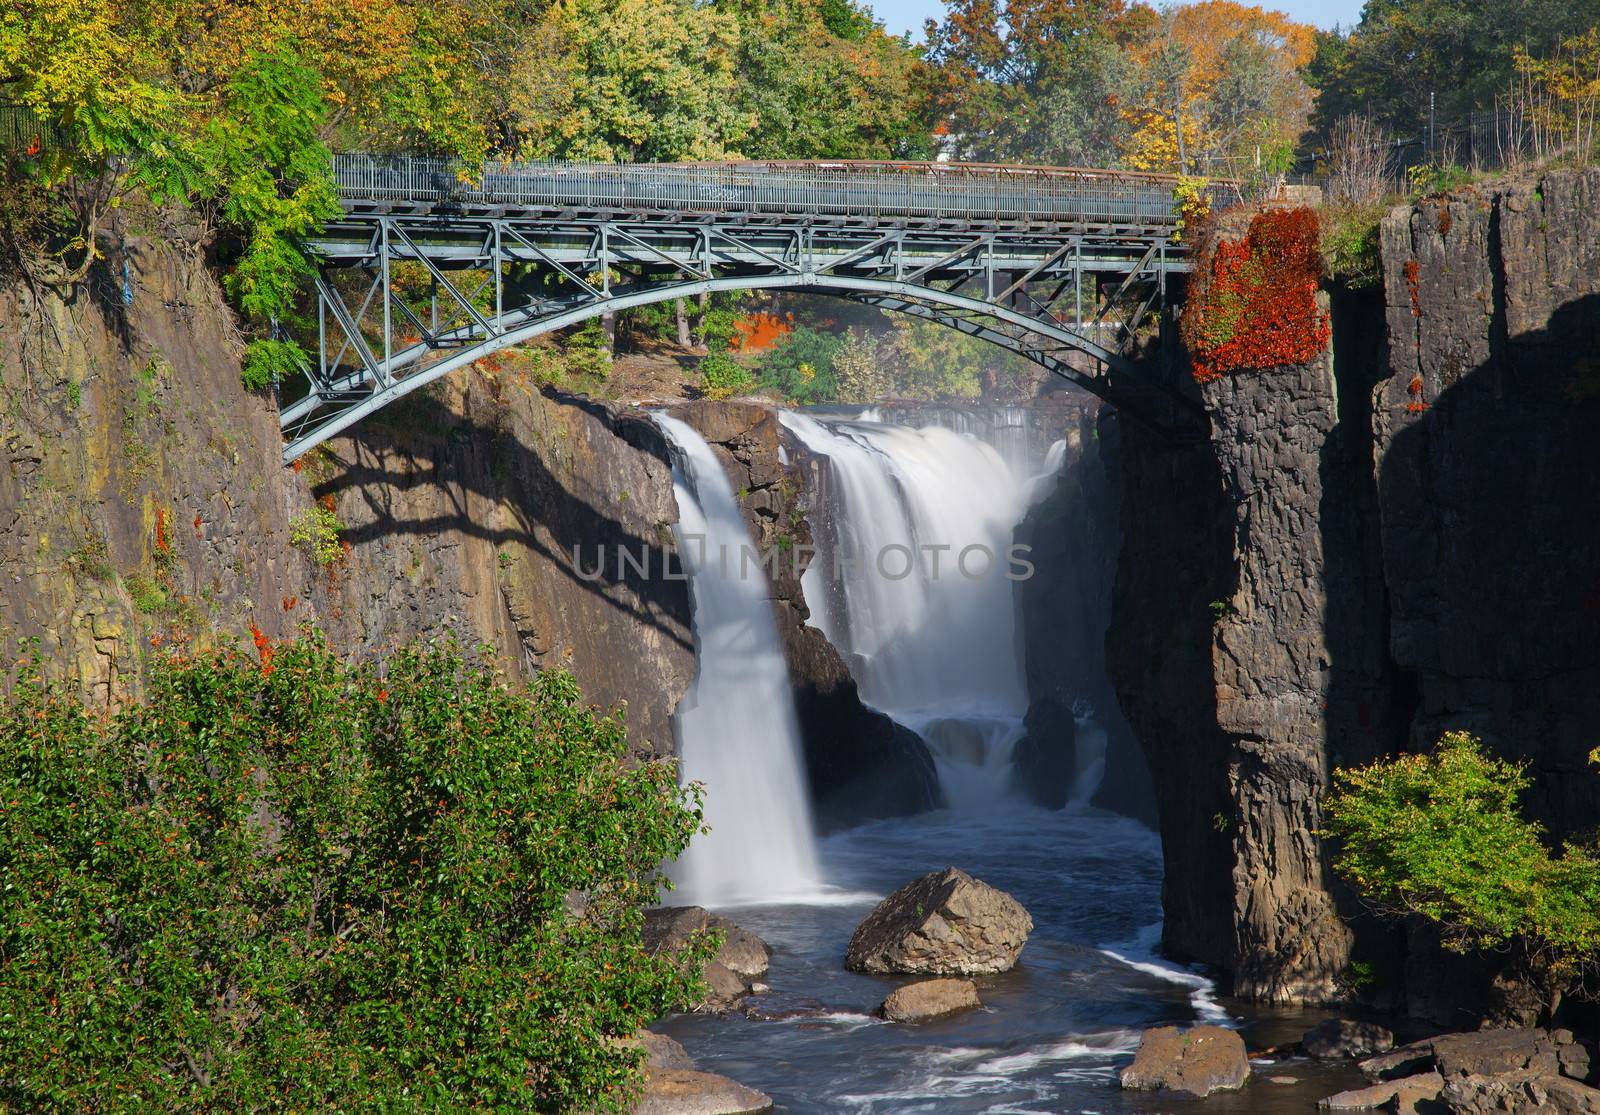 The Great Falls in Paterson, NJ by gary718